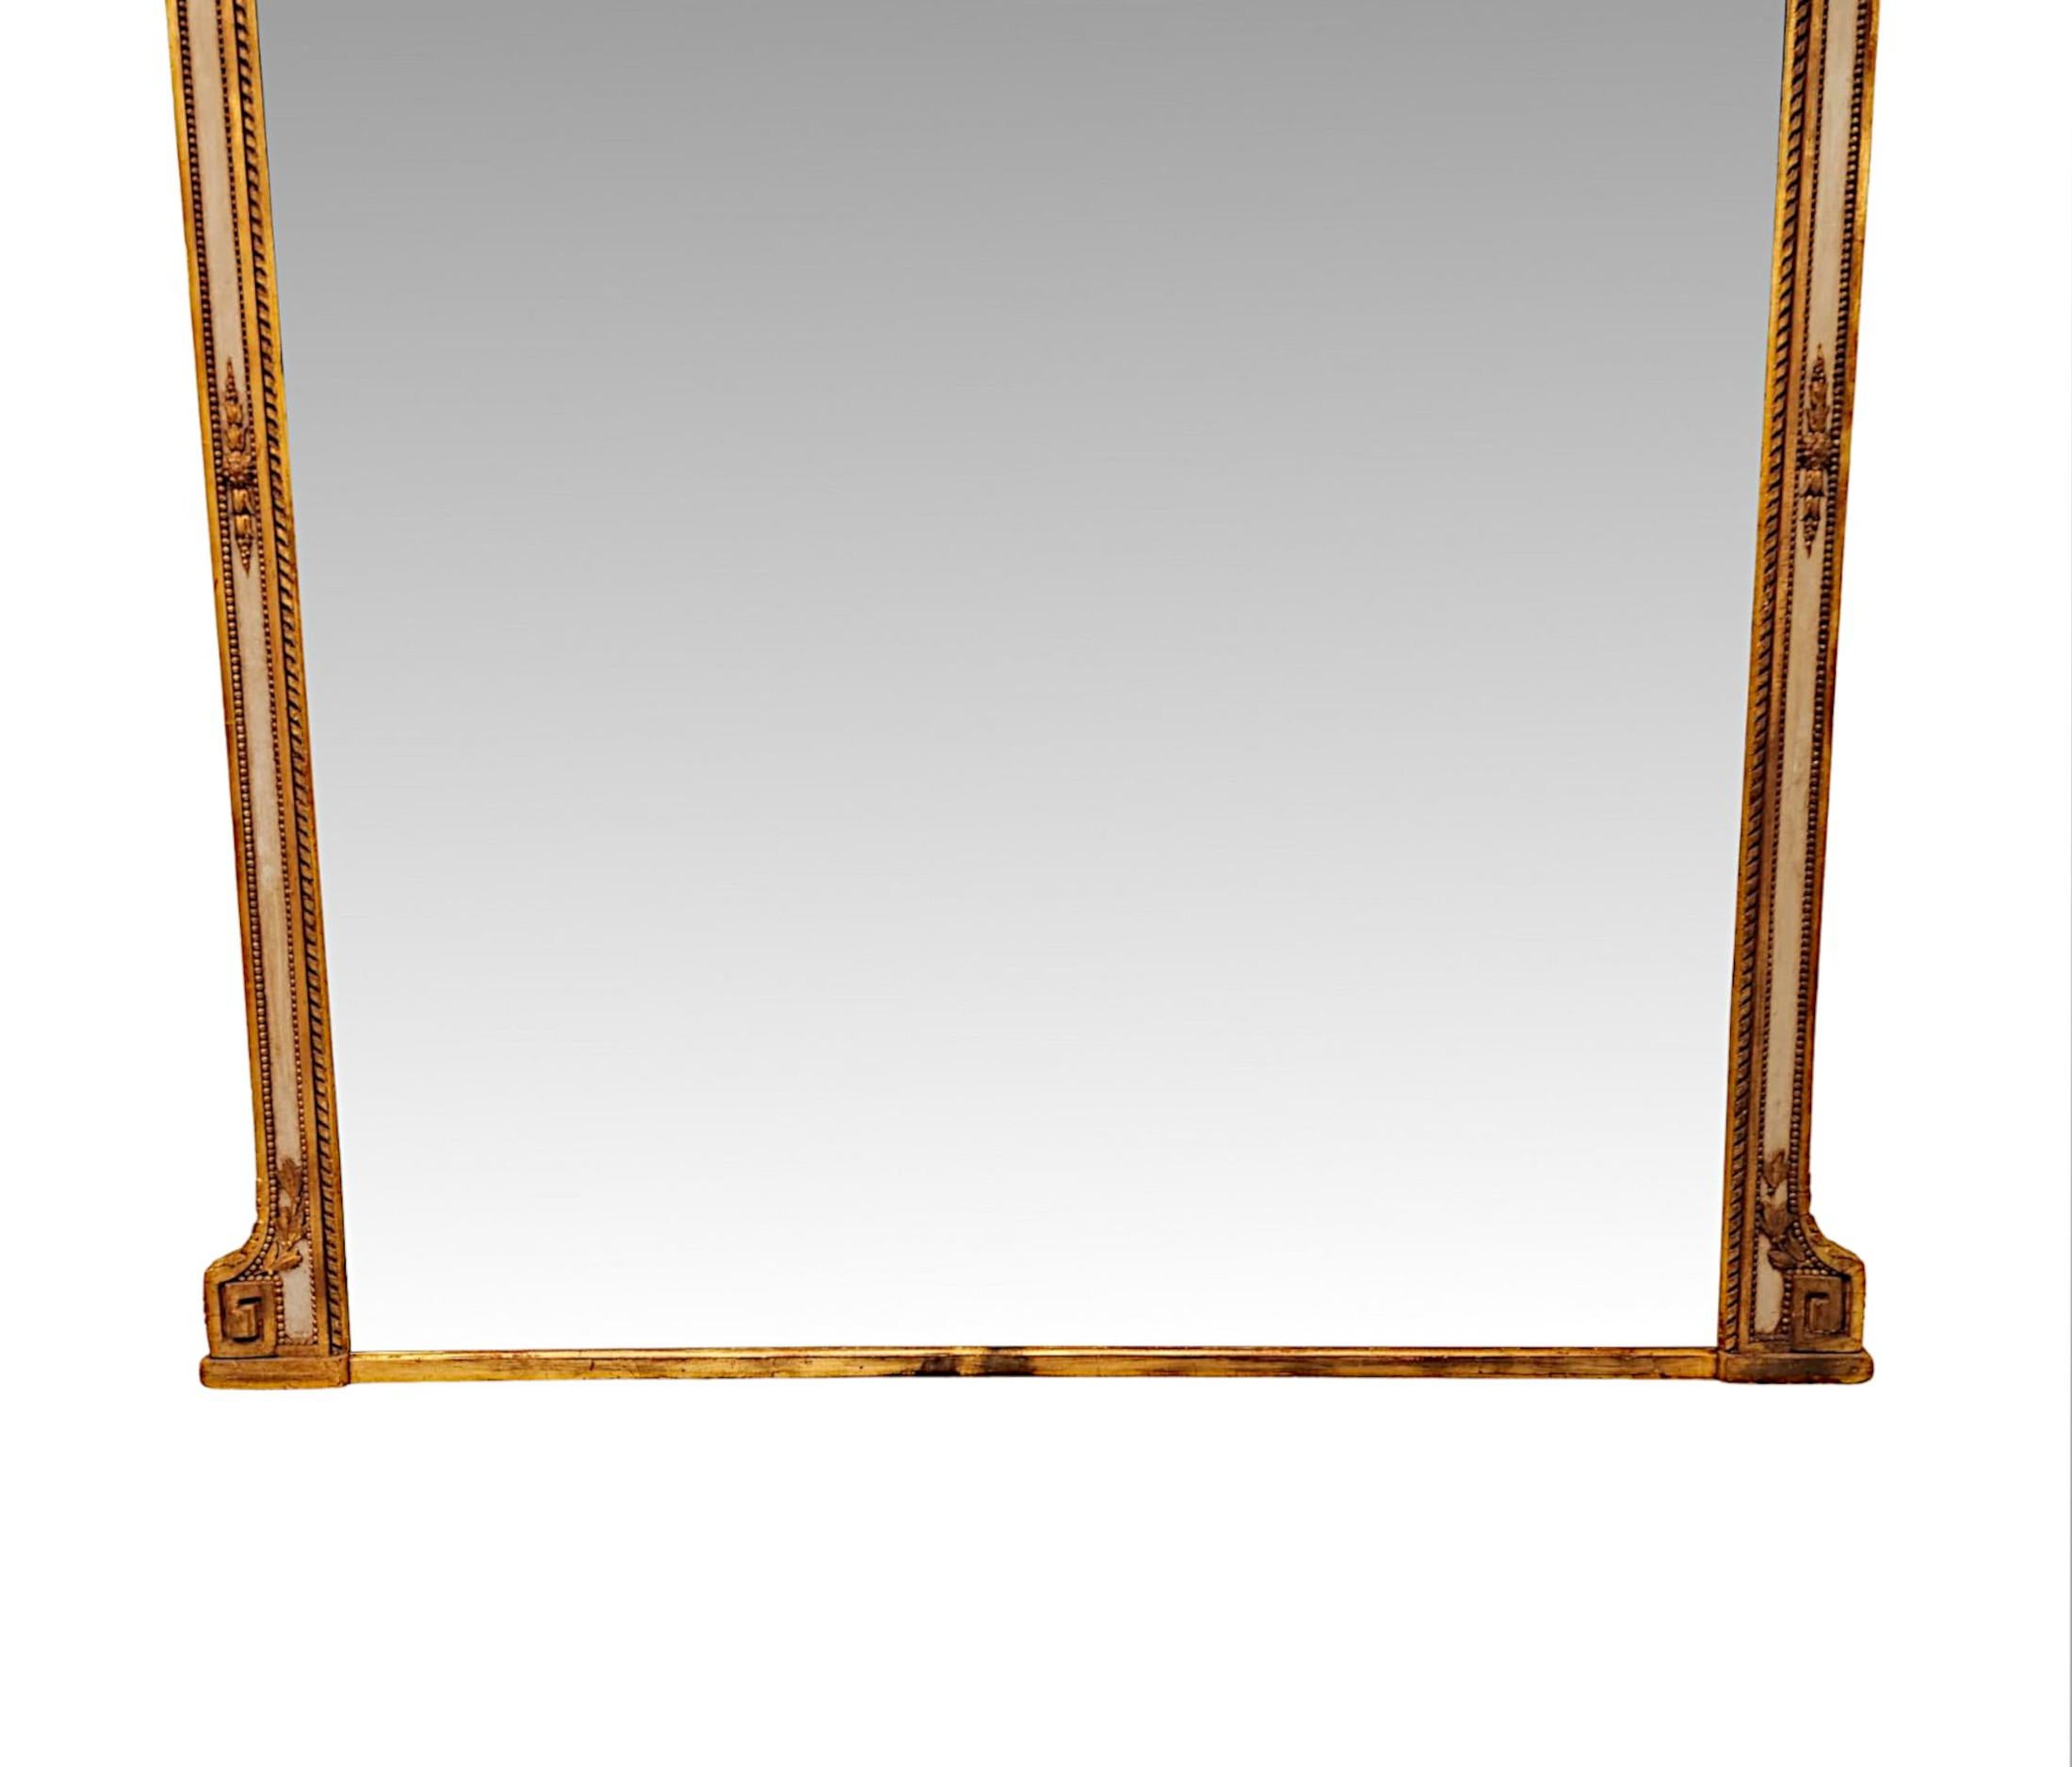 Glass An Exceptionally Rare 19th Century Giltwood Mirror by 'Lamb of Manchester' For Sale